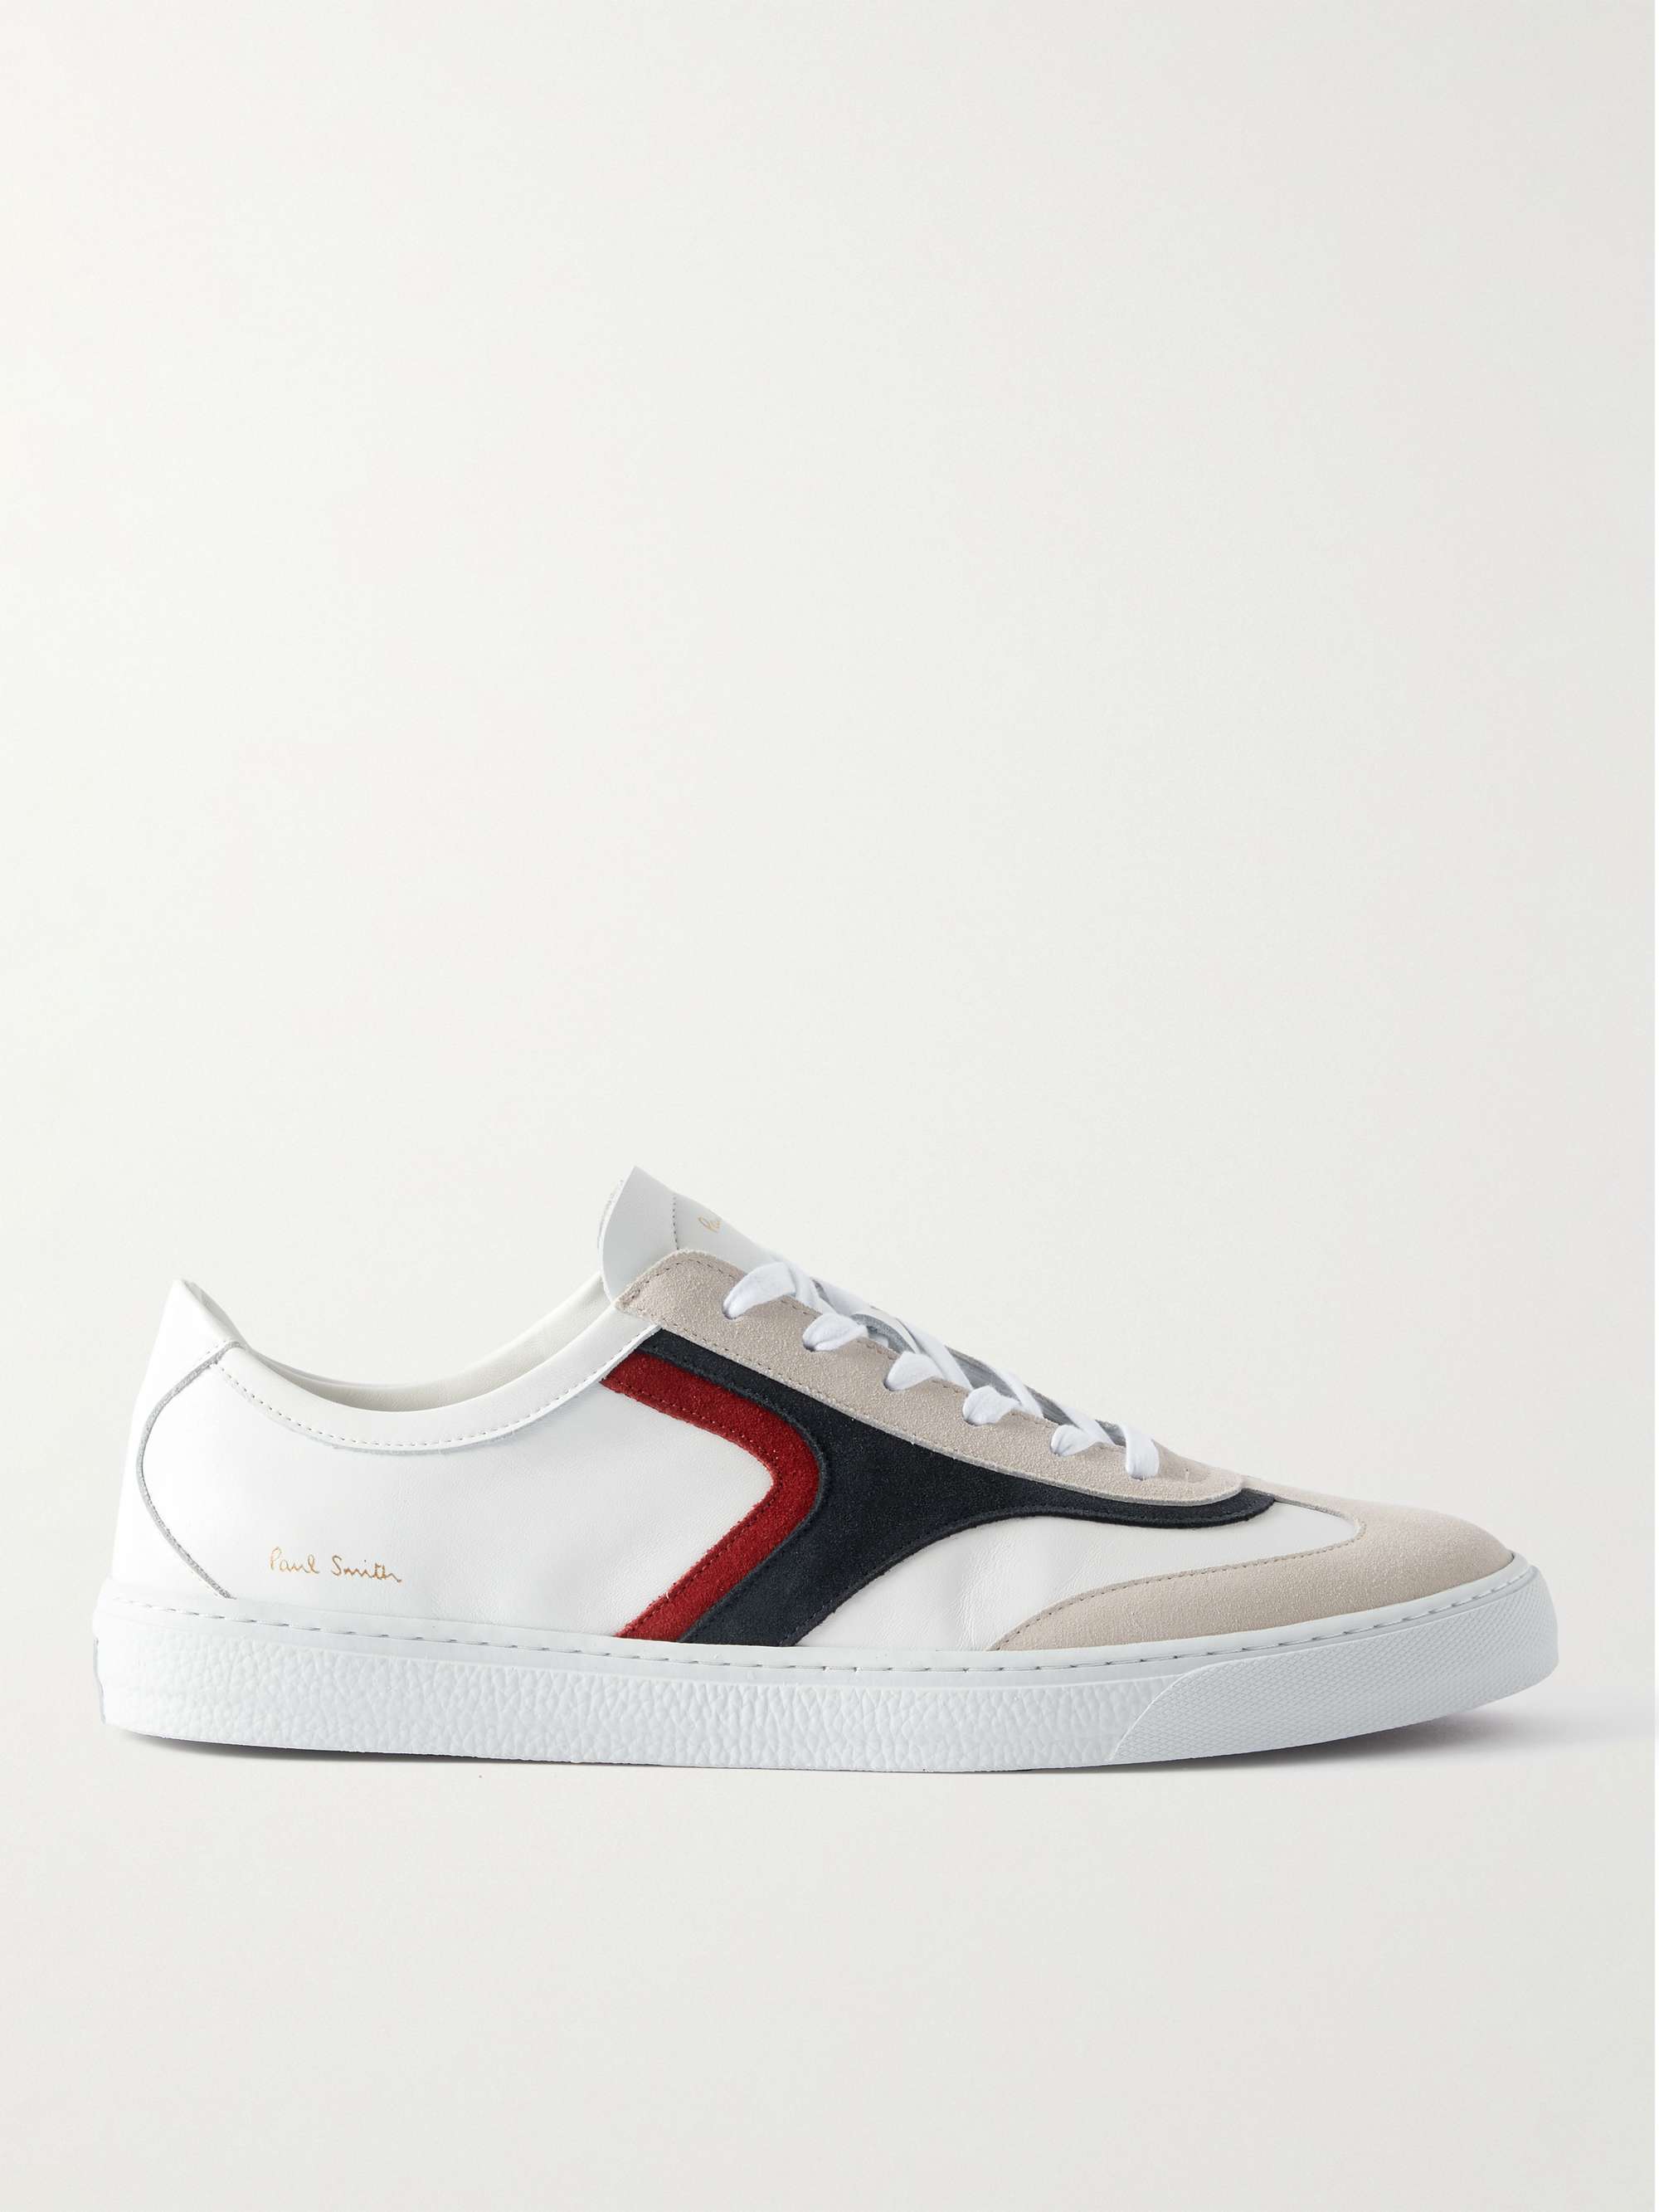 PAUL SMITH Suede-Trimmed Leather Sneakers for Men | MR PORTER